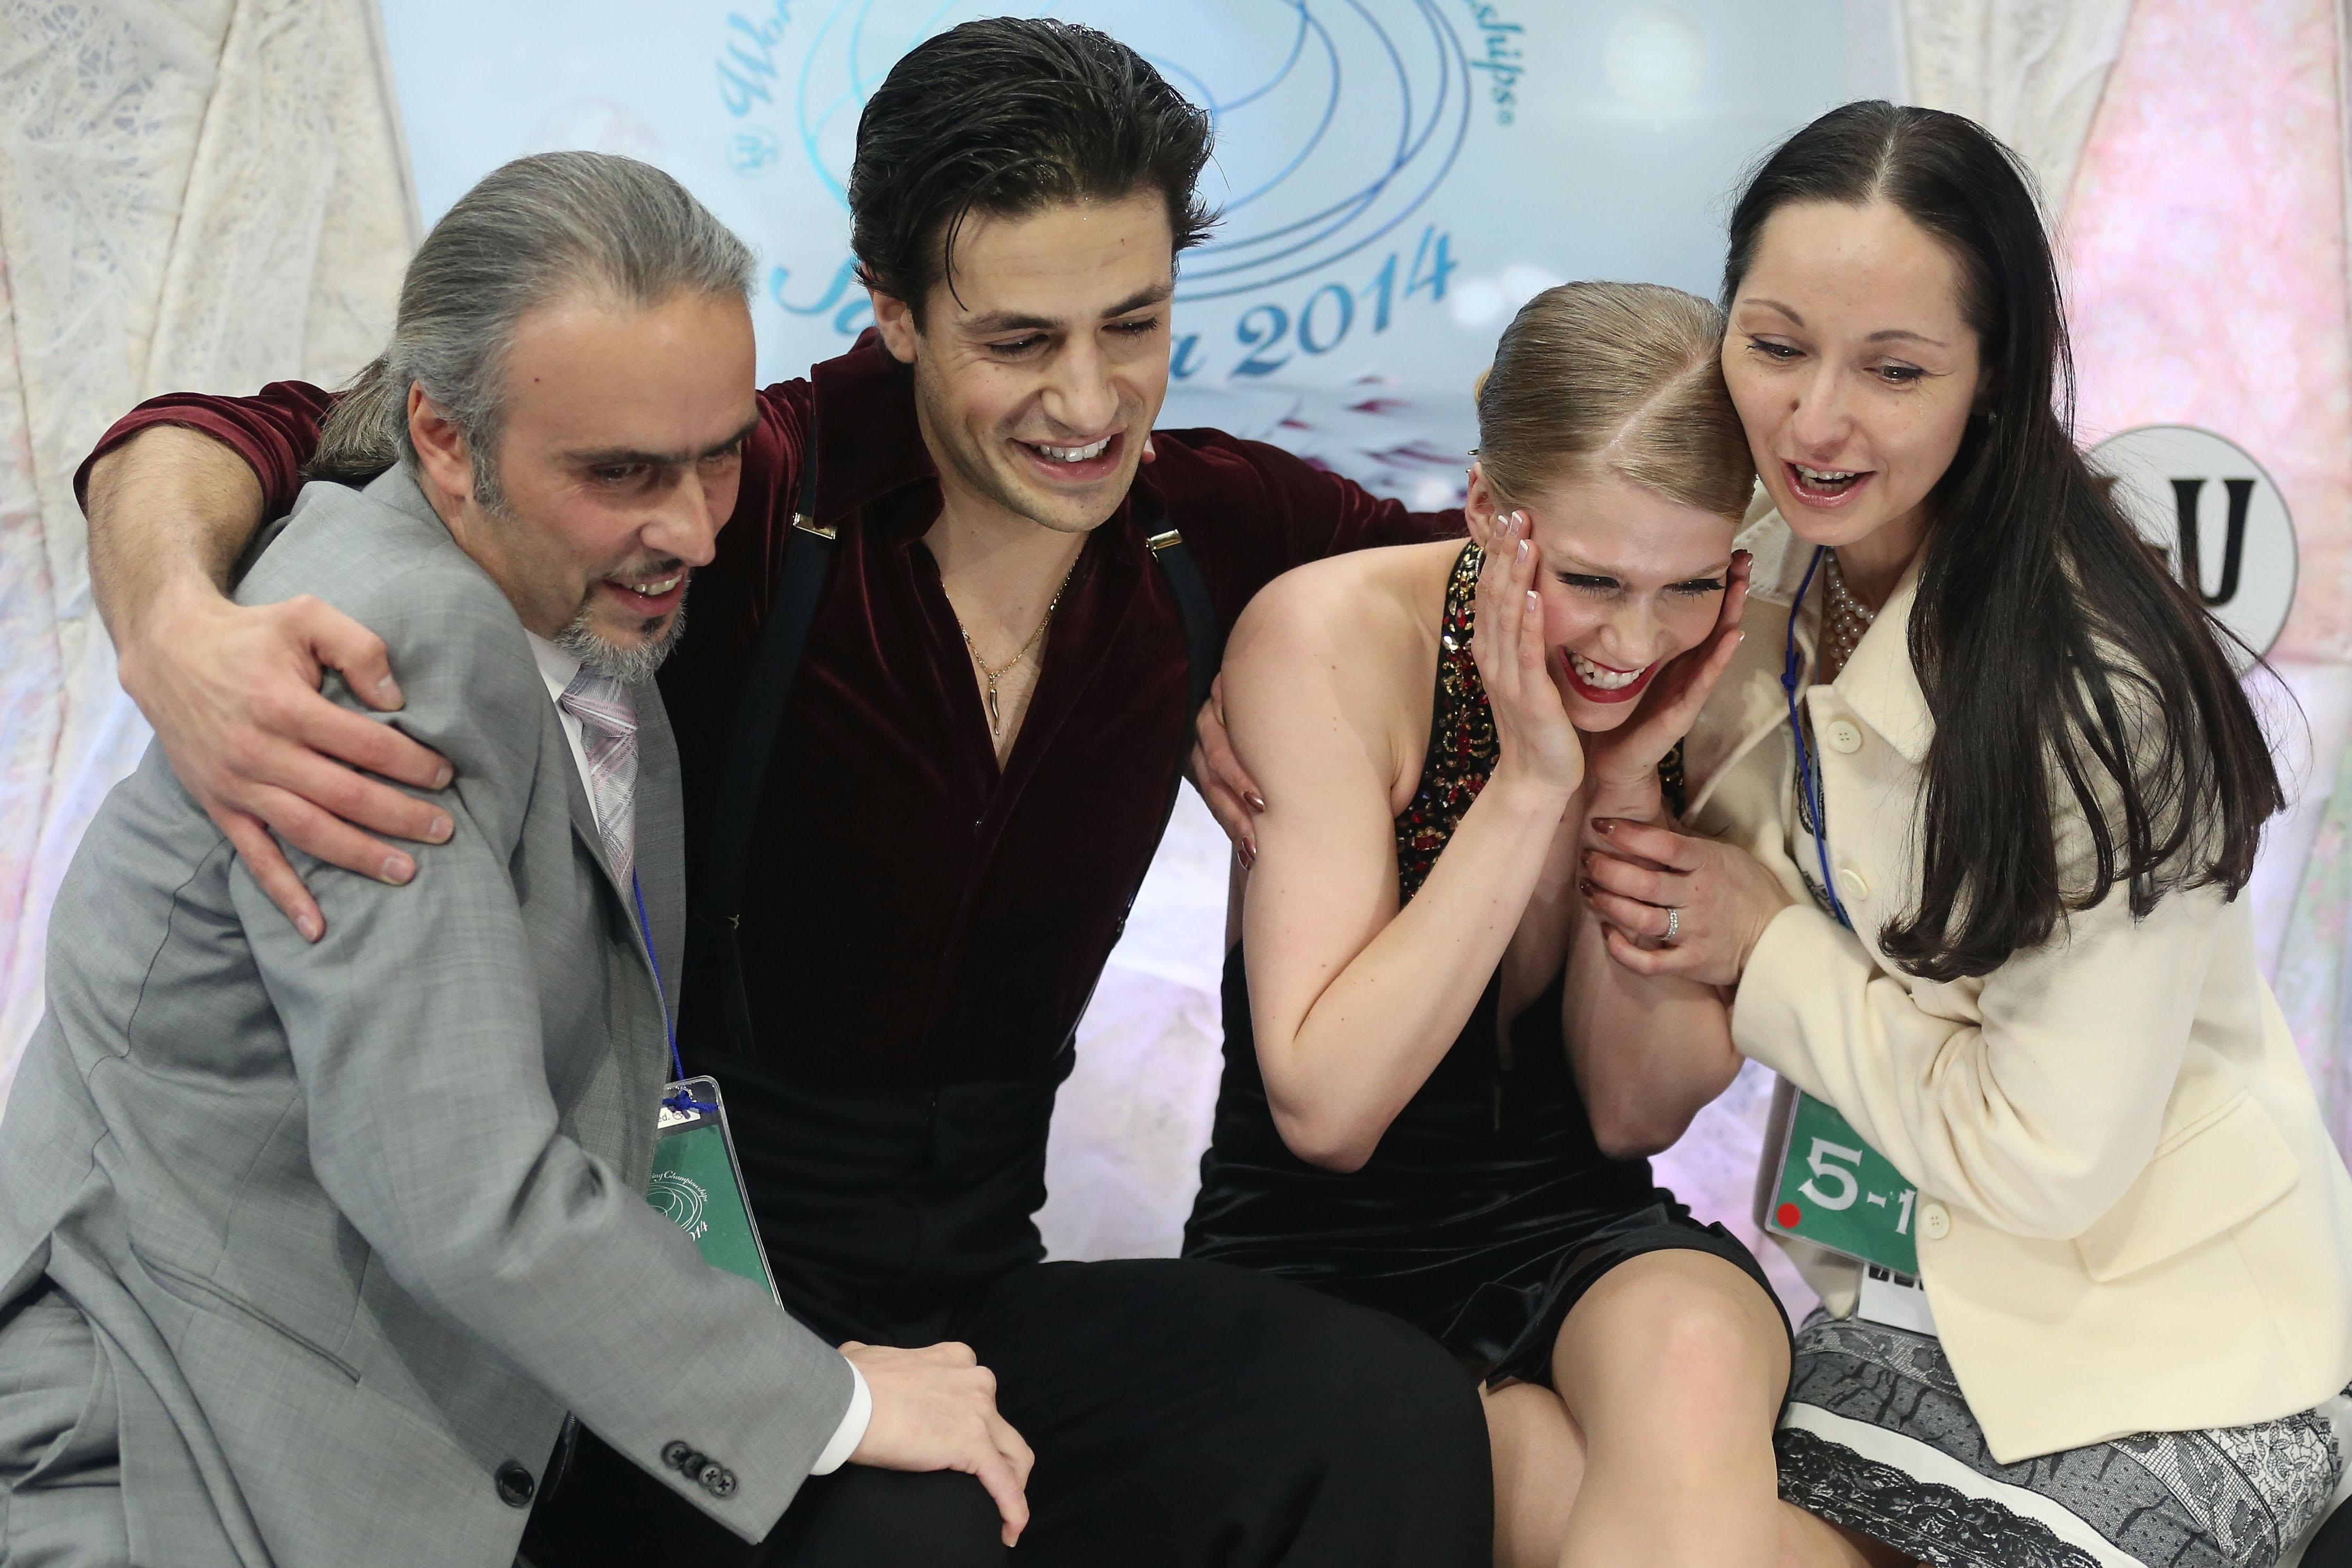 WFSC JPN Coach Pasquale Camerlengo, skaters Andrew Poje and Kaitlyn Weaver (CAN) and coach Anjelika Krylova 2014©Getty Images 481242277